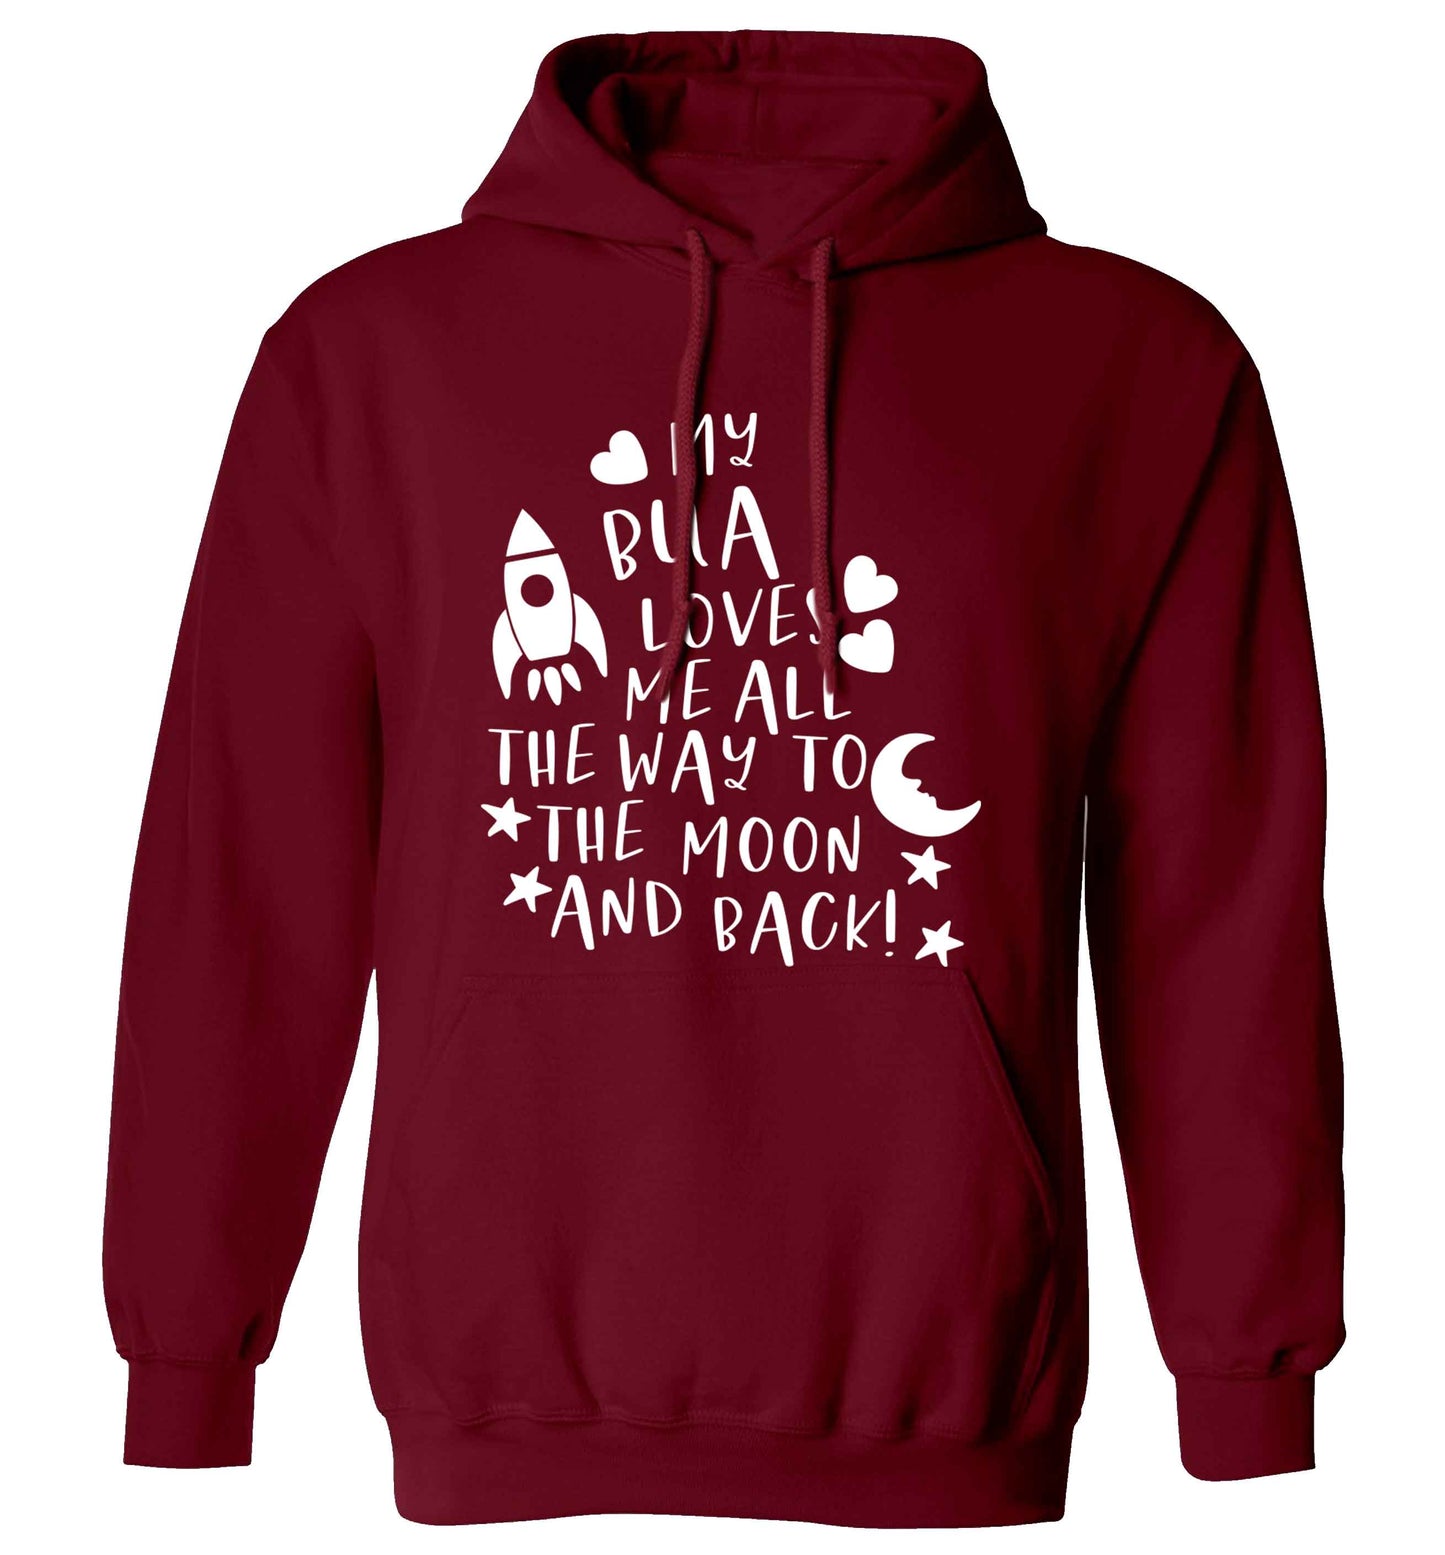 My bua loves me all they way to the moon and back adults unisex maroon hoodie 2XL